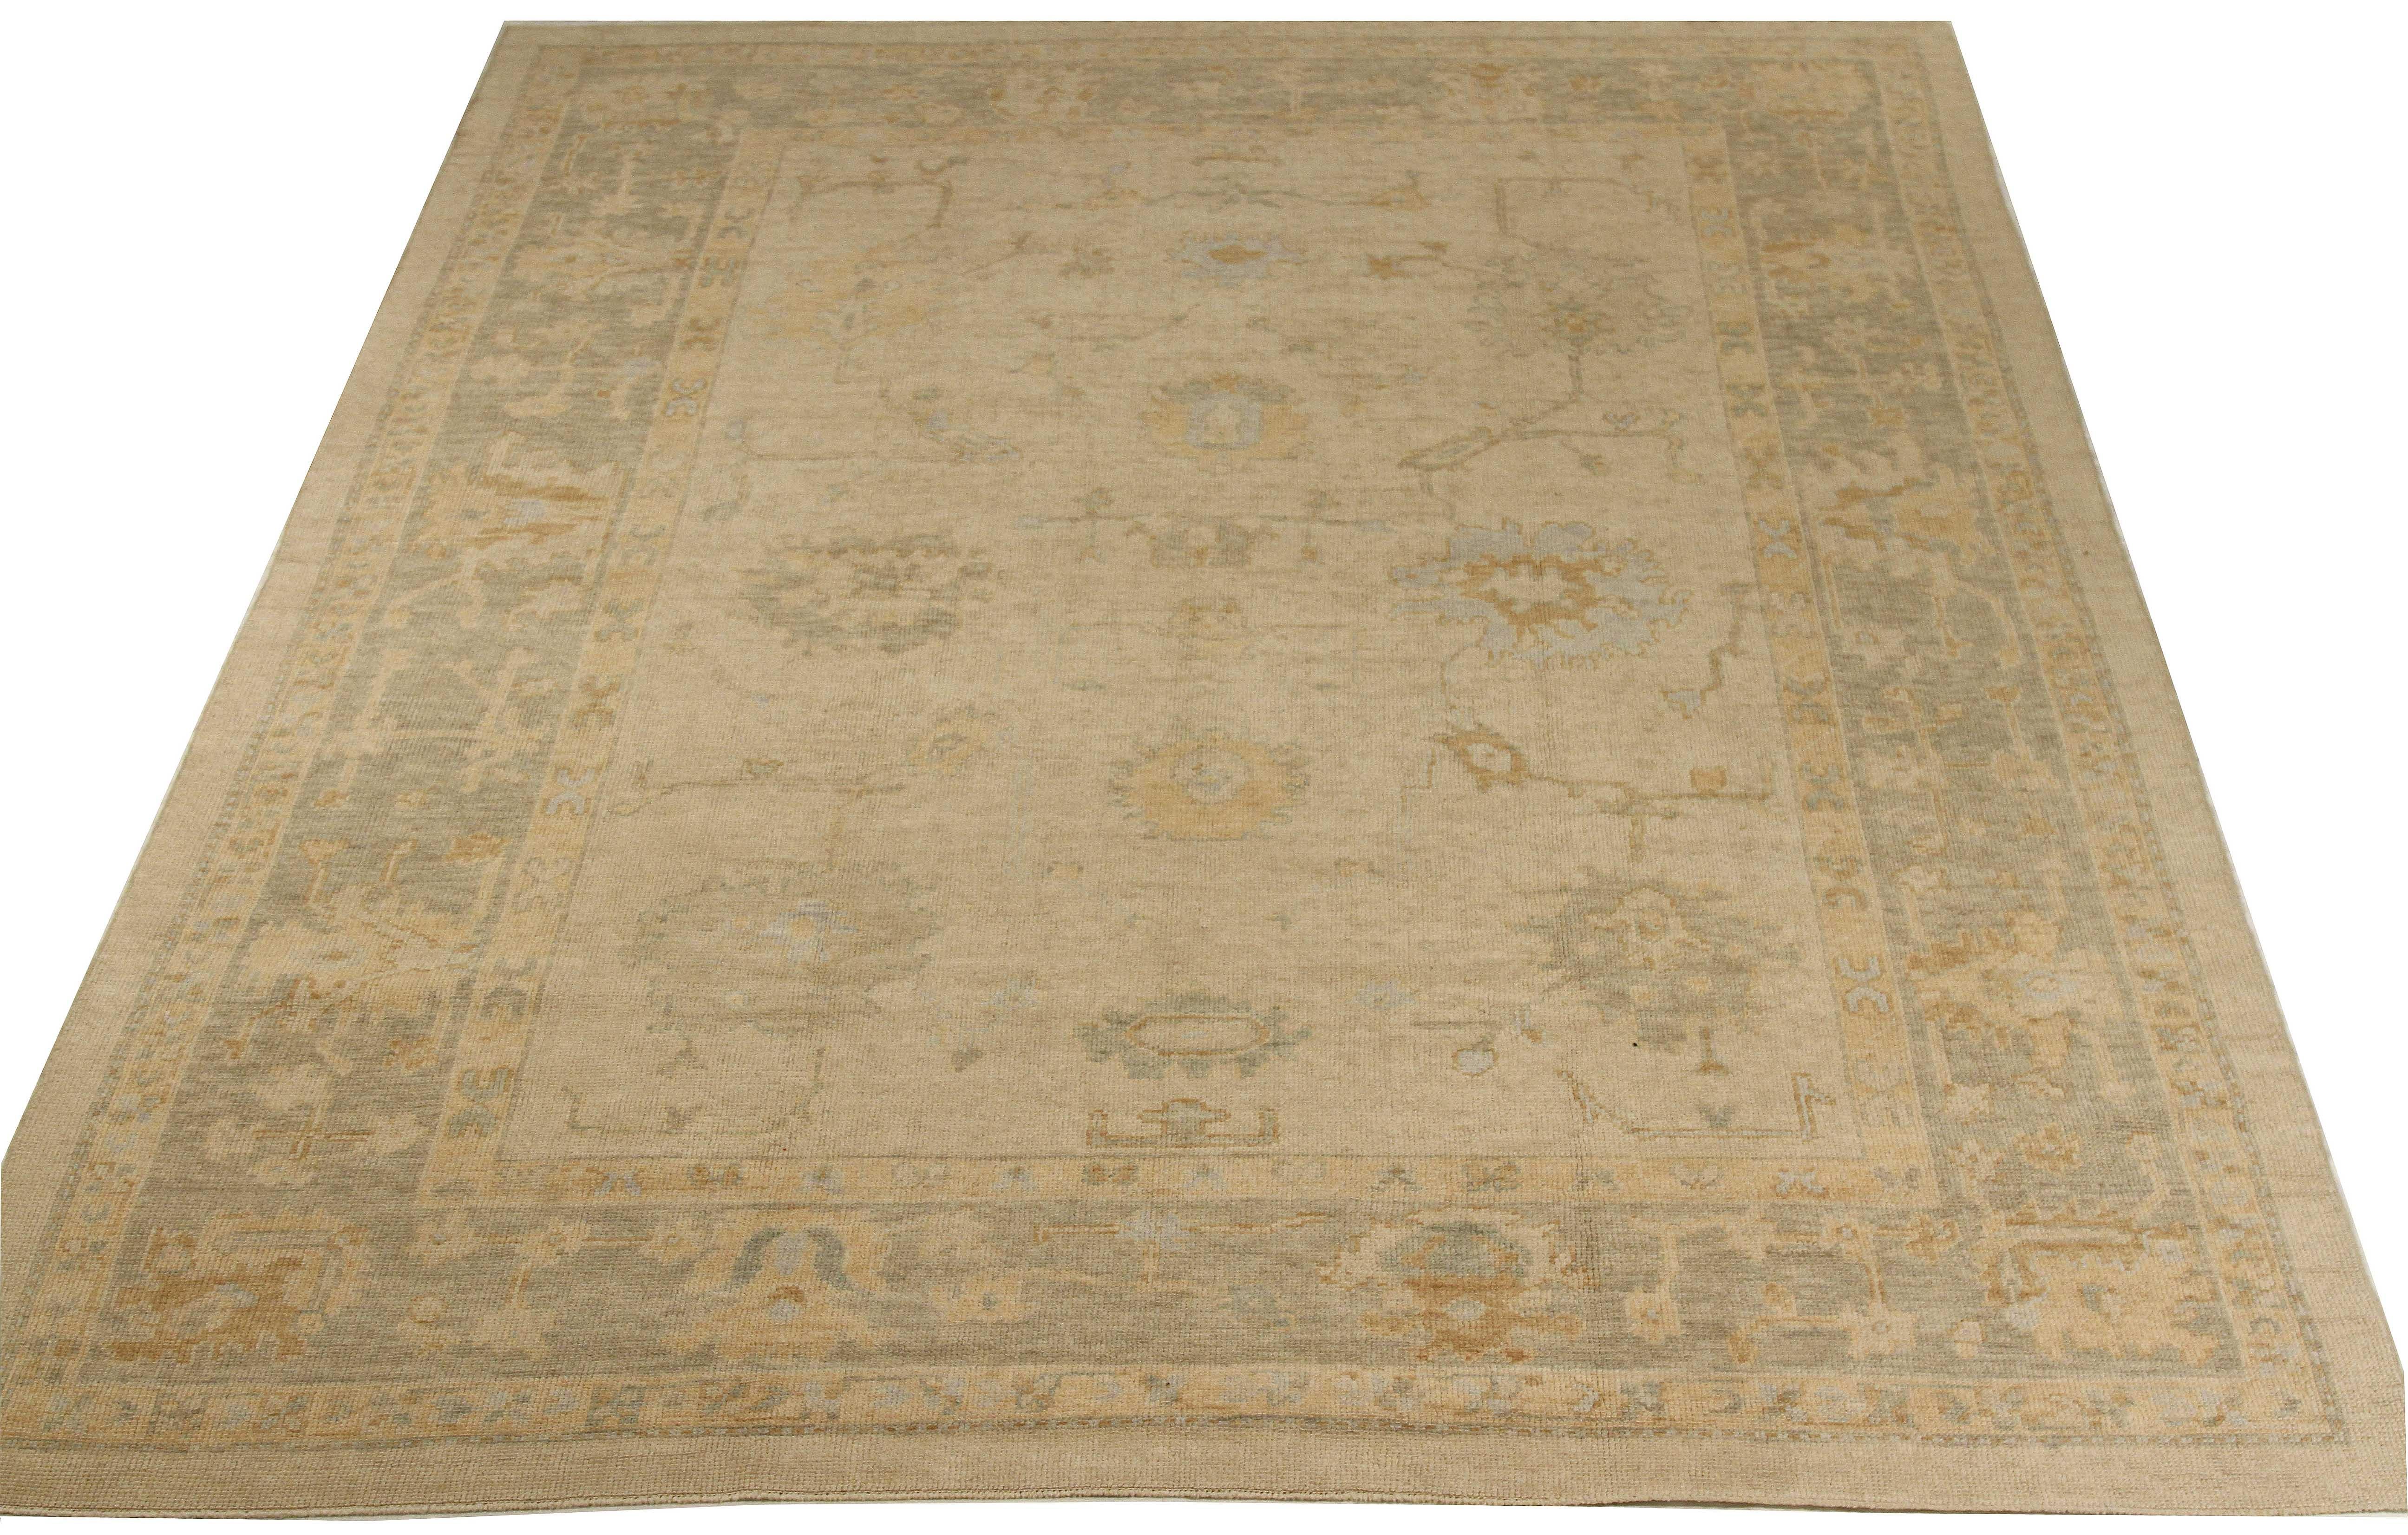 Contemporary Turkish runner rug made of handwoven sheep’s wool of the finest quality. It’s colored with organic vegetable dyes that are certified safe for humans and pets alike. It features flower details in gray and brown all-over associated with